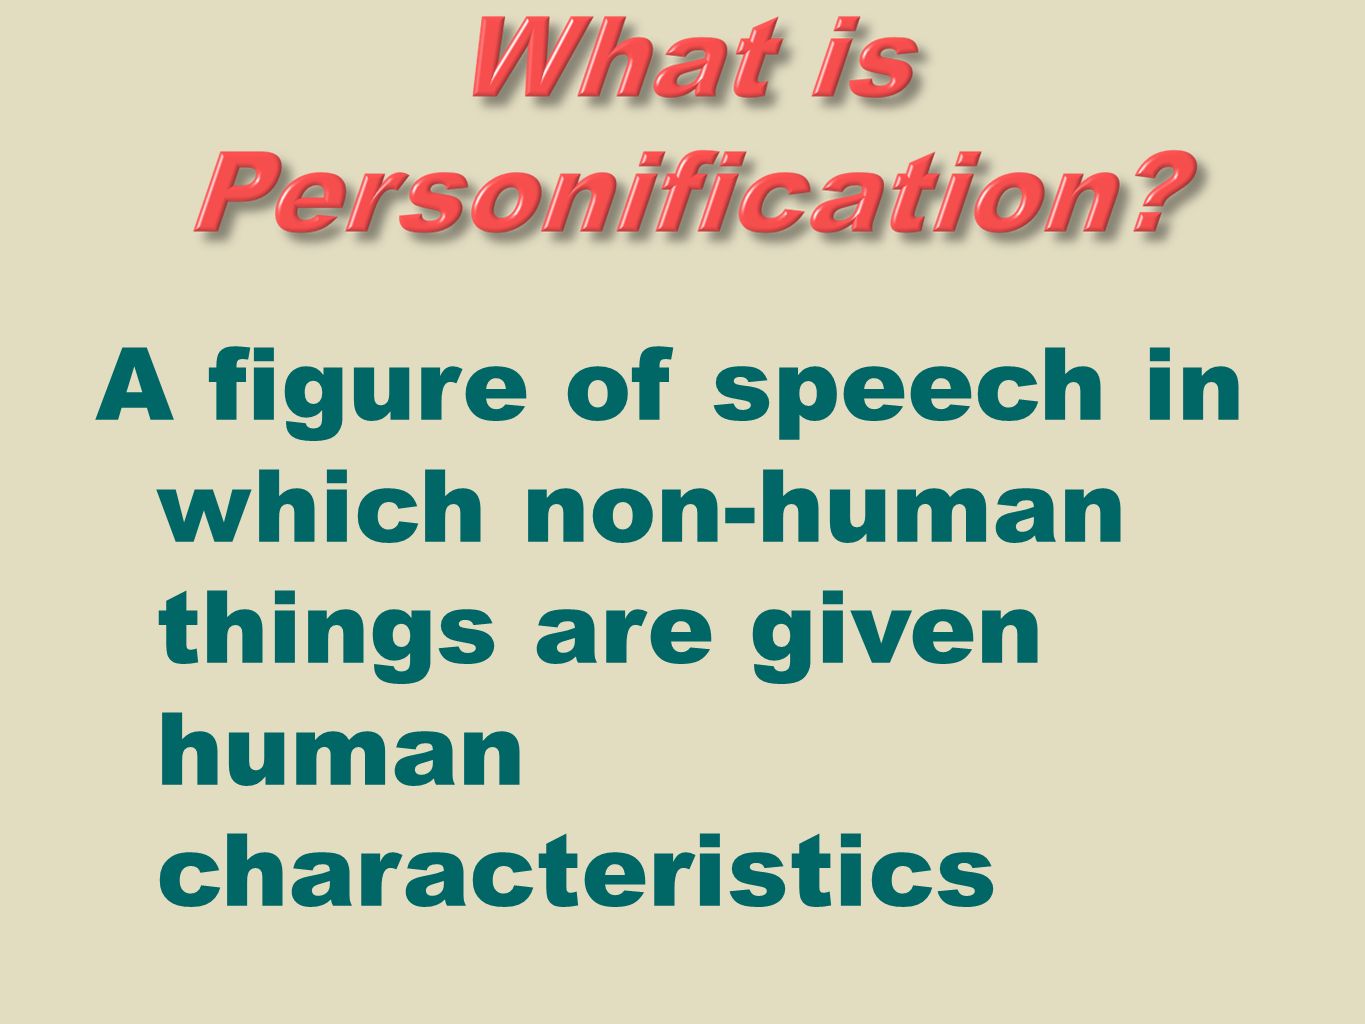 A figure of speech in which non-human things are given human characteristics